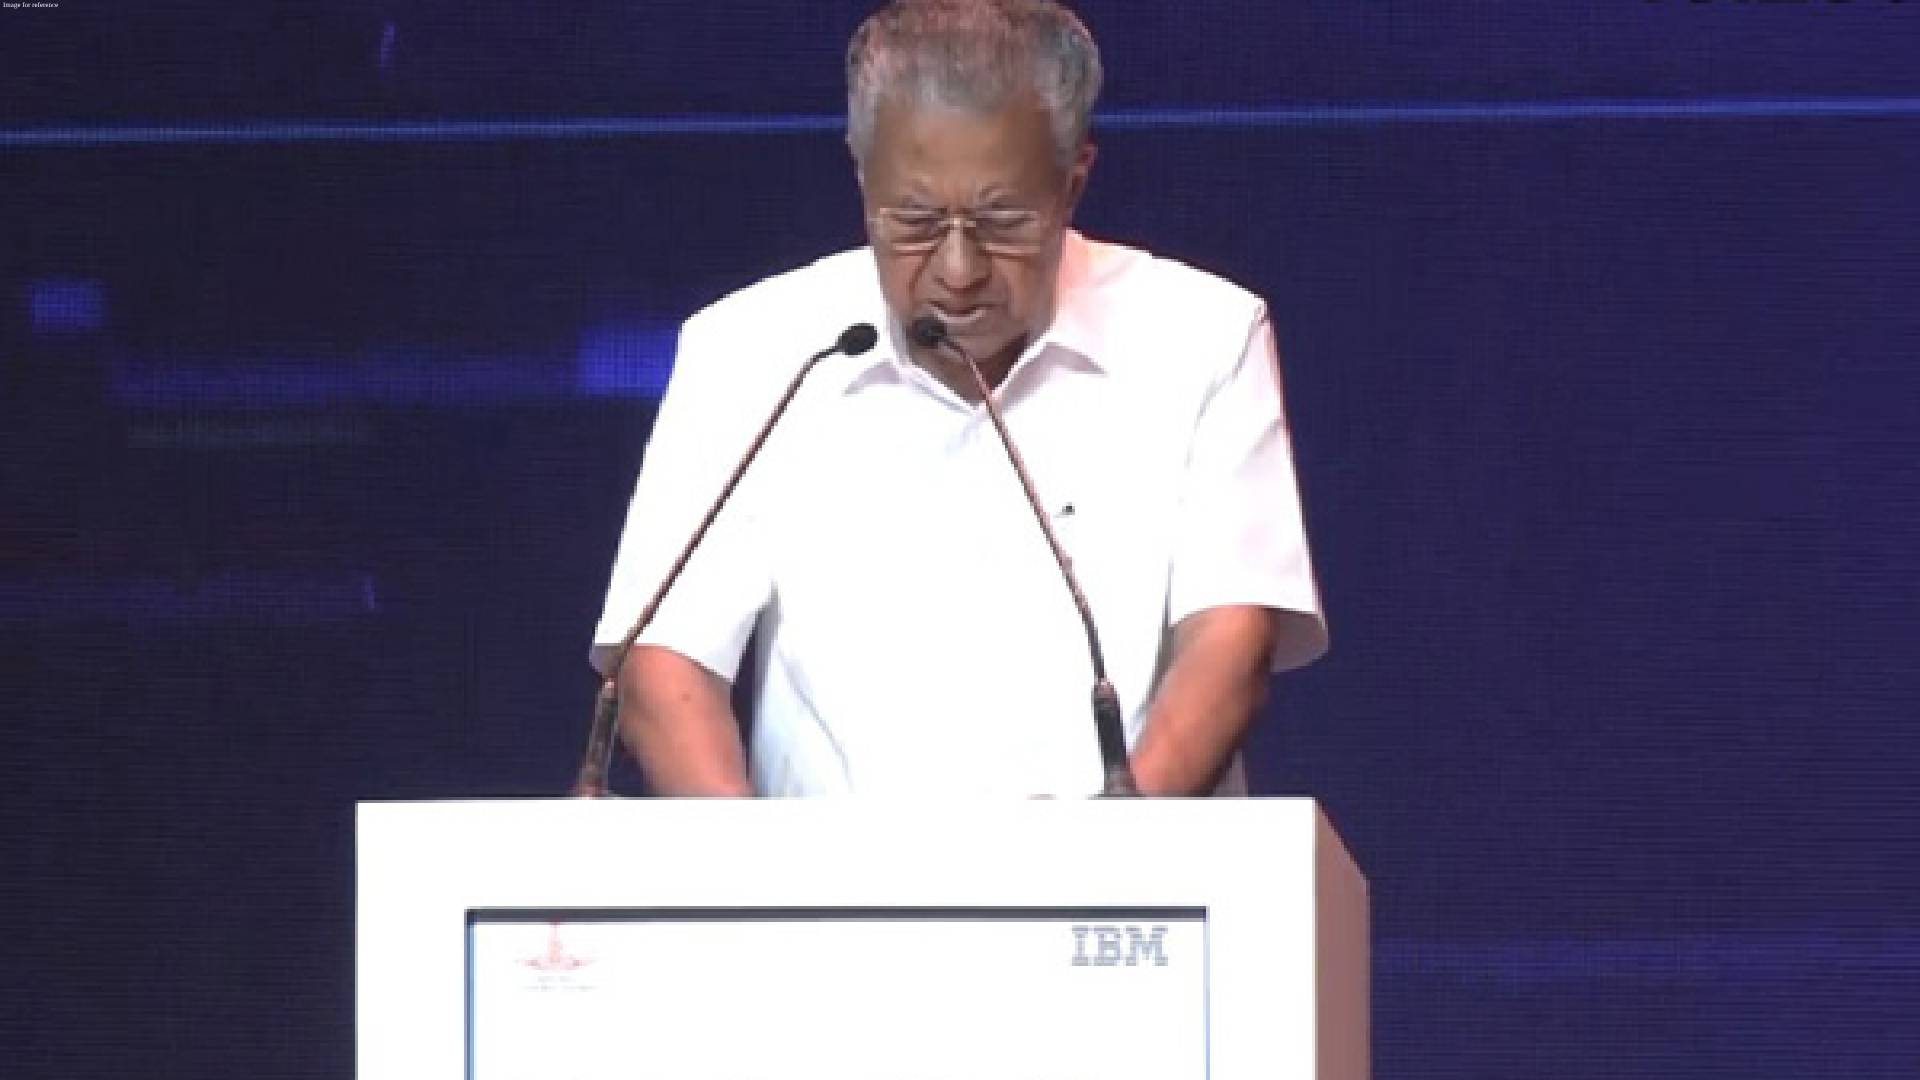 Kerala committed to fostering Artificial Intelligence-based investments: CM Vijayan